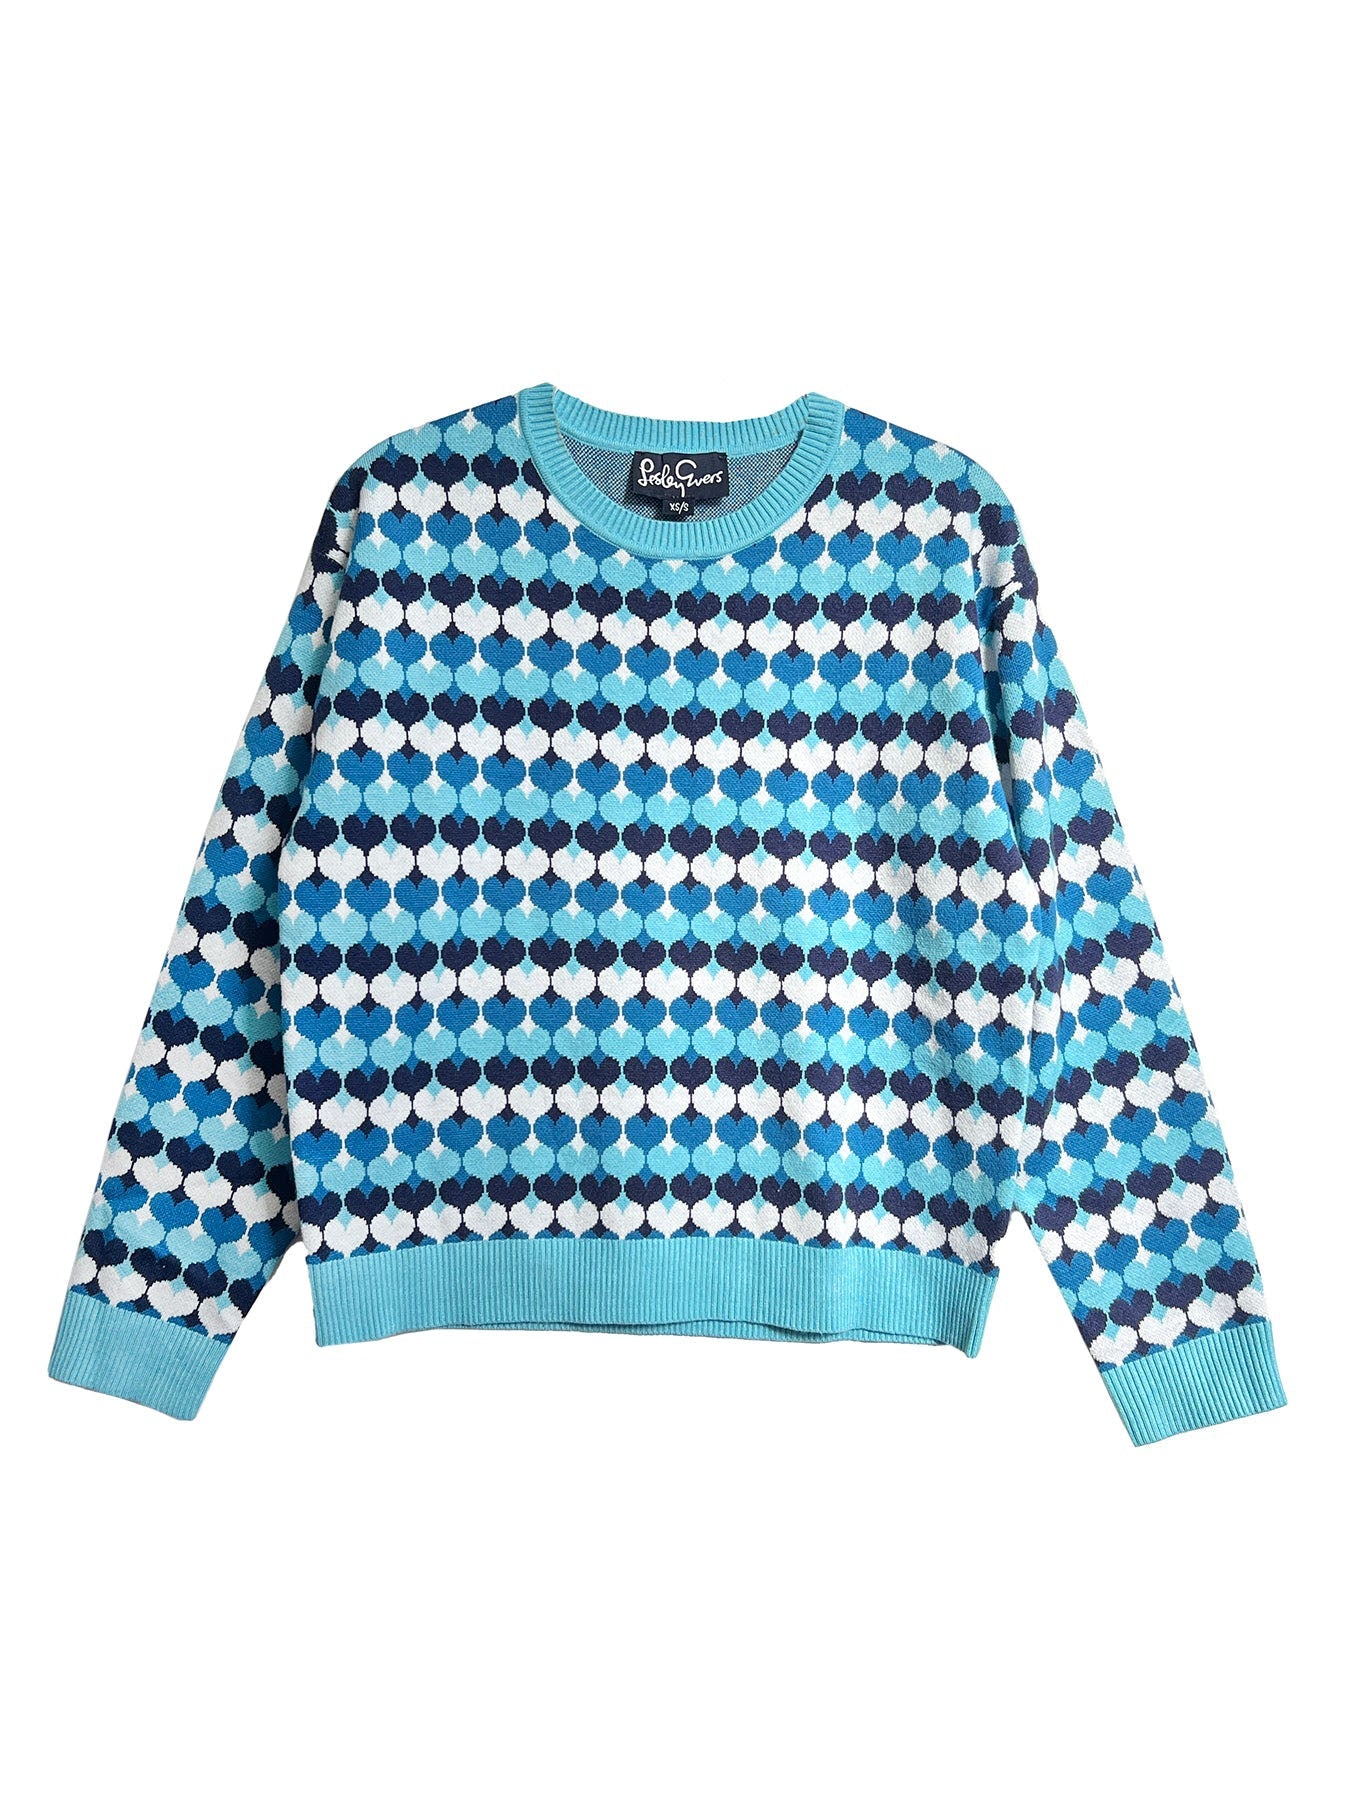 SYLVIE sweater Blue Hearts - Lesley Evers-hearts-Shop-Shop/All Products